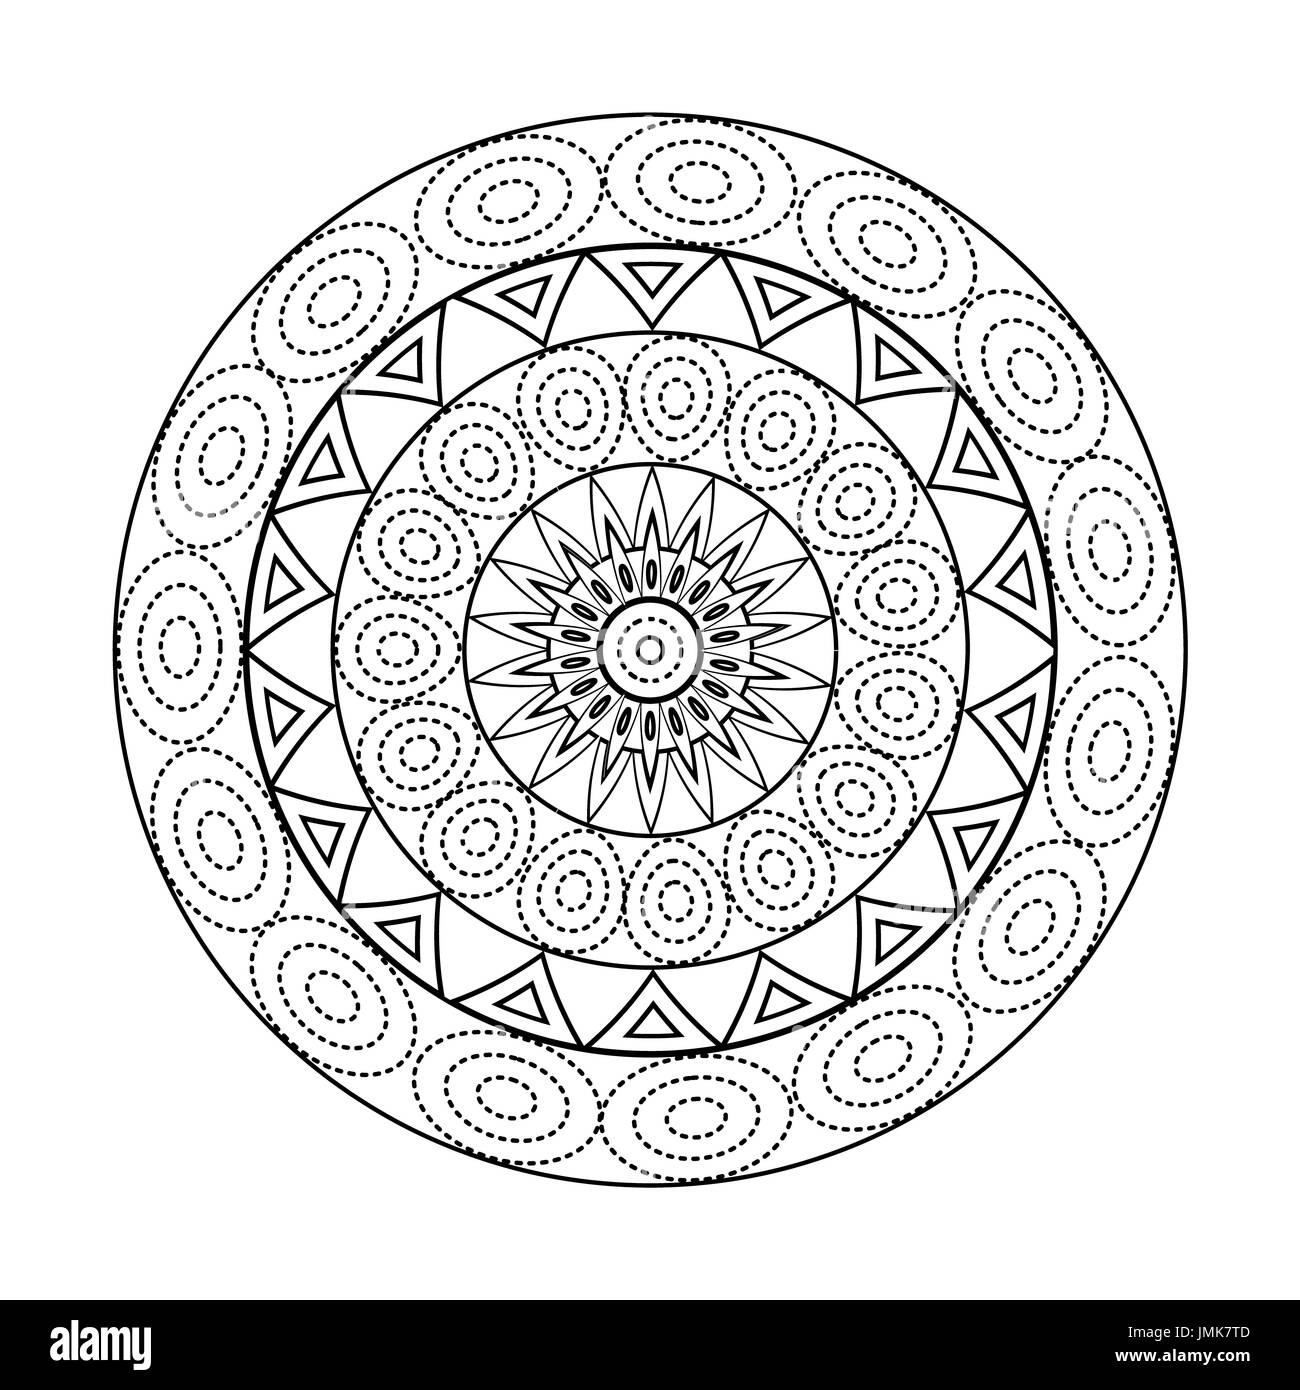 Mandalas for coloring book. Decorative black and white round outline  ornament. Unusual flower shape. Oriental and anti-stress therapy patterns.  yoga l Stock Photo - Alamy